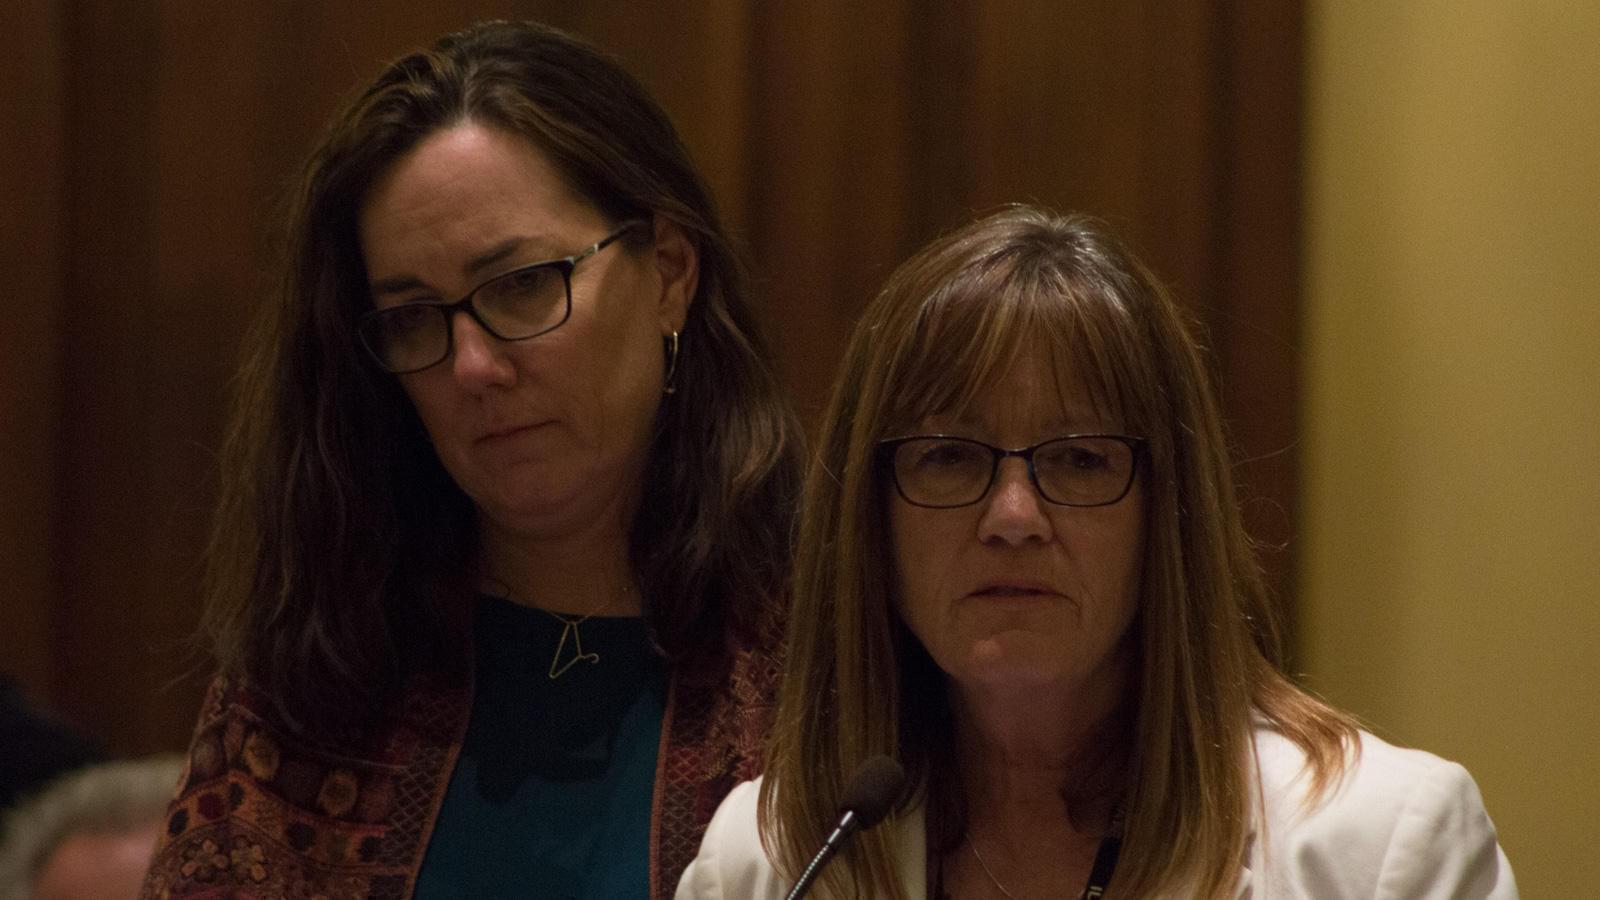 State Rep. Kelly Cassidy, left, stood behind Sen. Melinda Bush as she presented the Reproductive Health Act to the Illinois Senate on Friday.